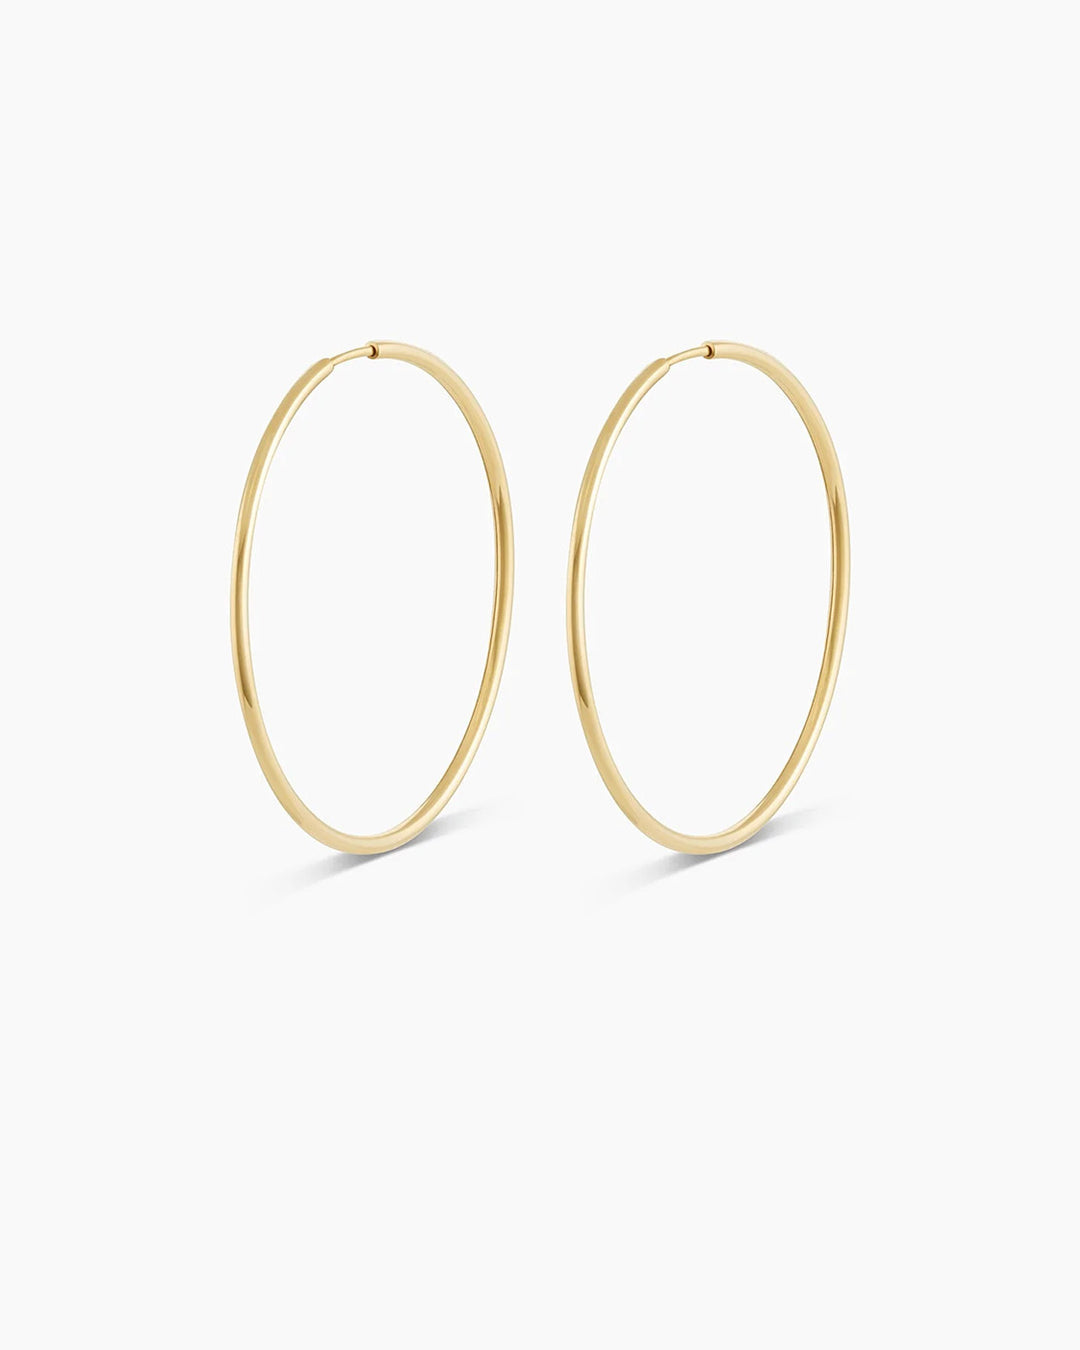 14K Yellow Gold Classic Hoops